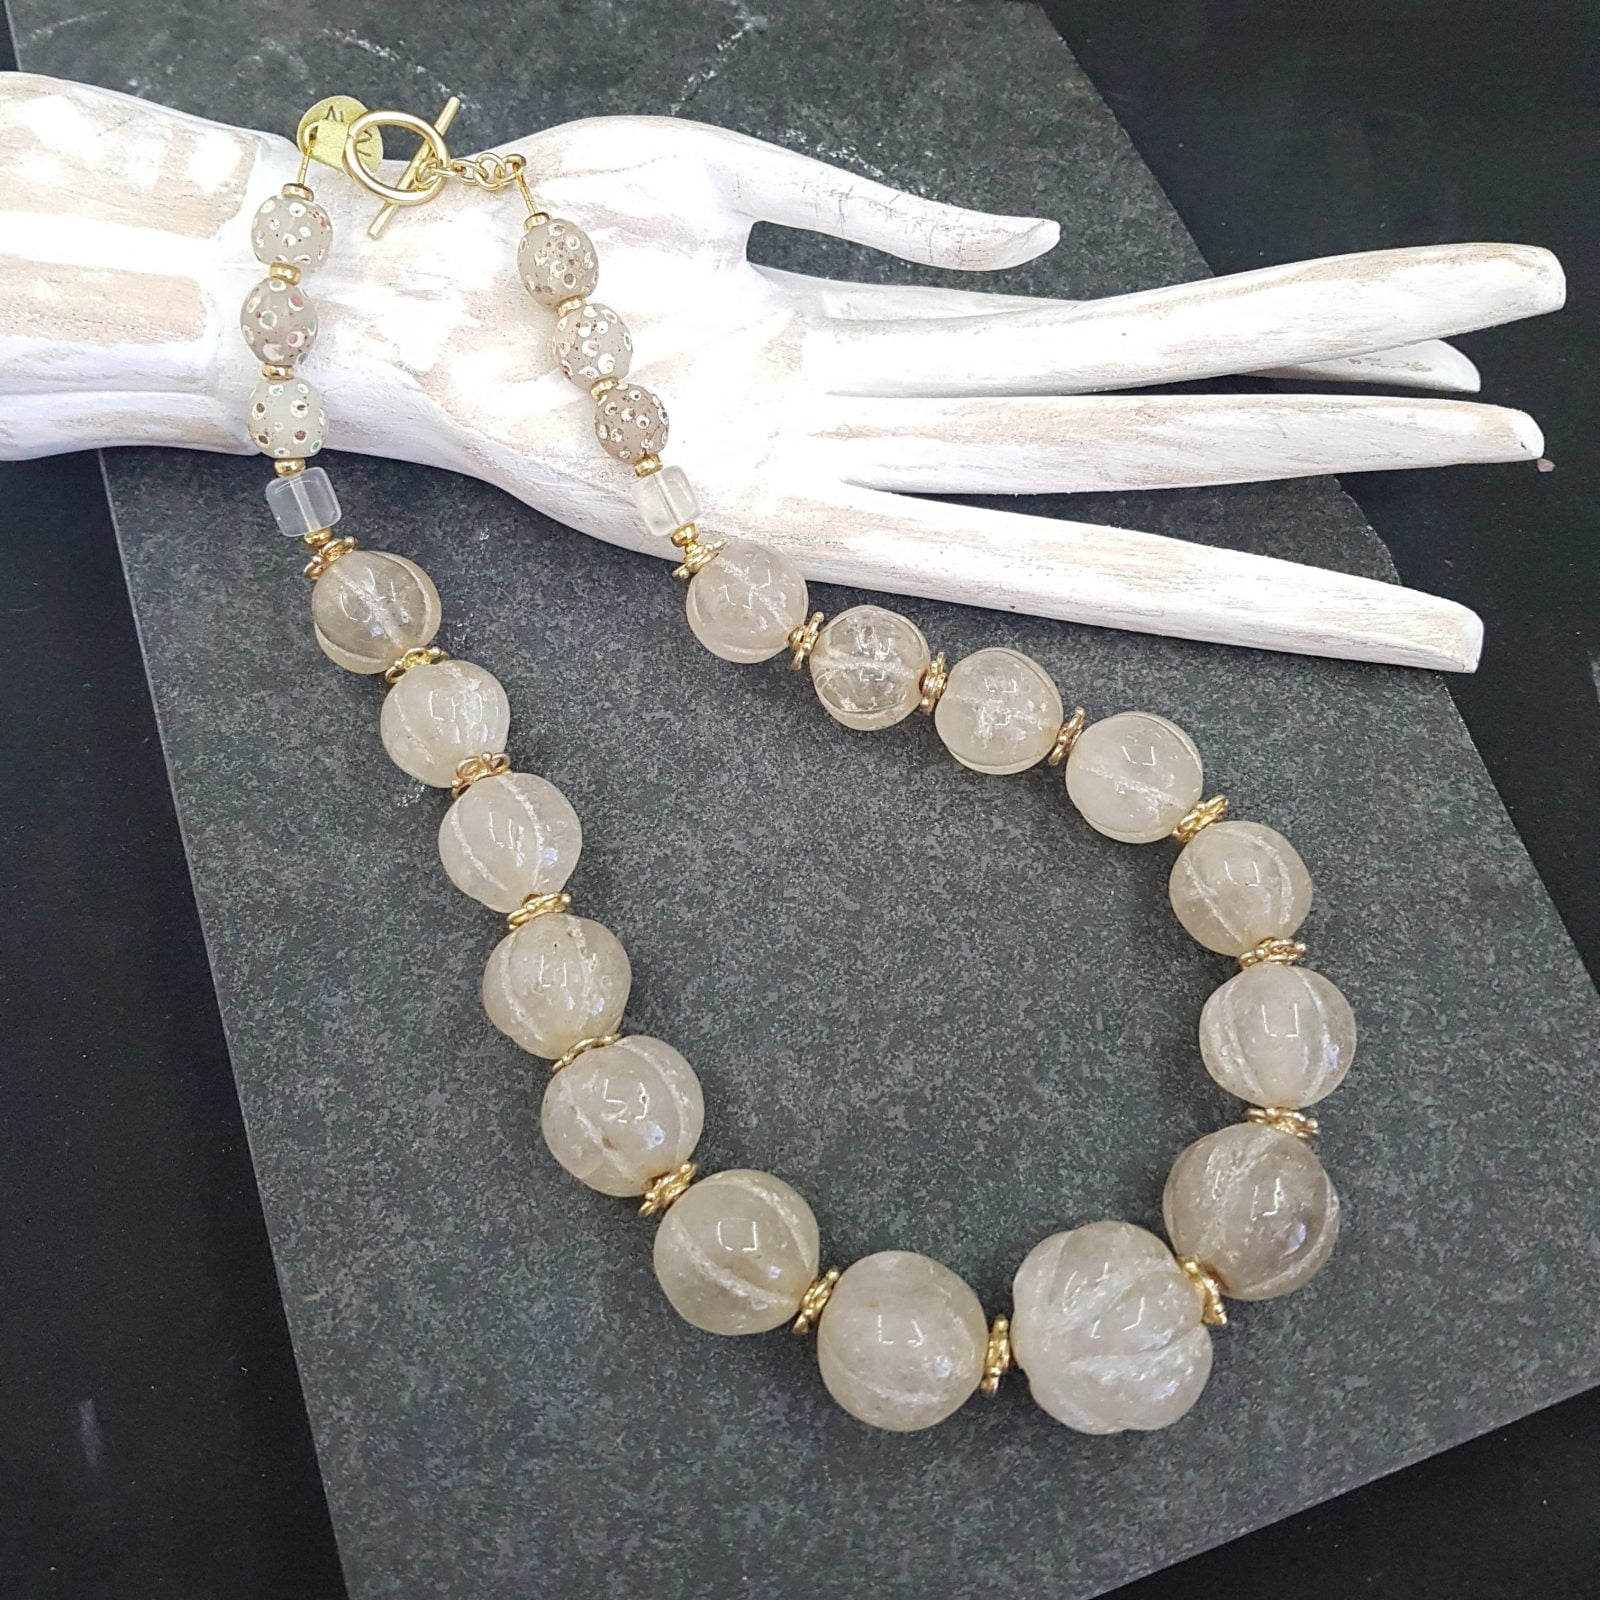 Estate Sterling Silver Natural Clear Rock Crystal Quartz 25 Inch Bead  Necklace | eBay